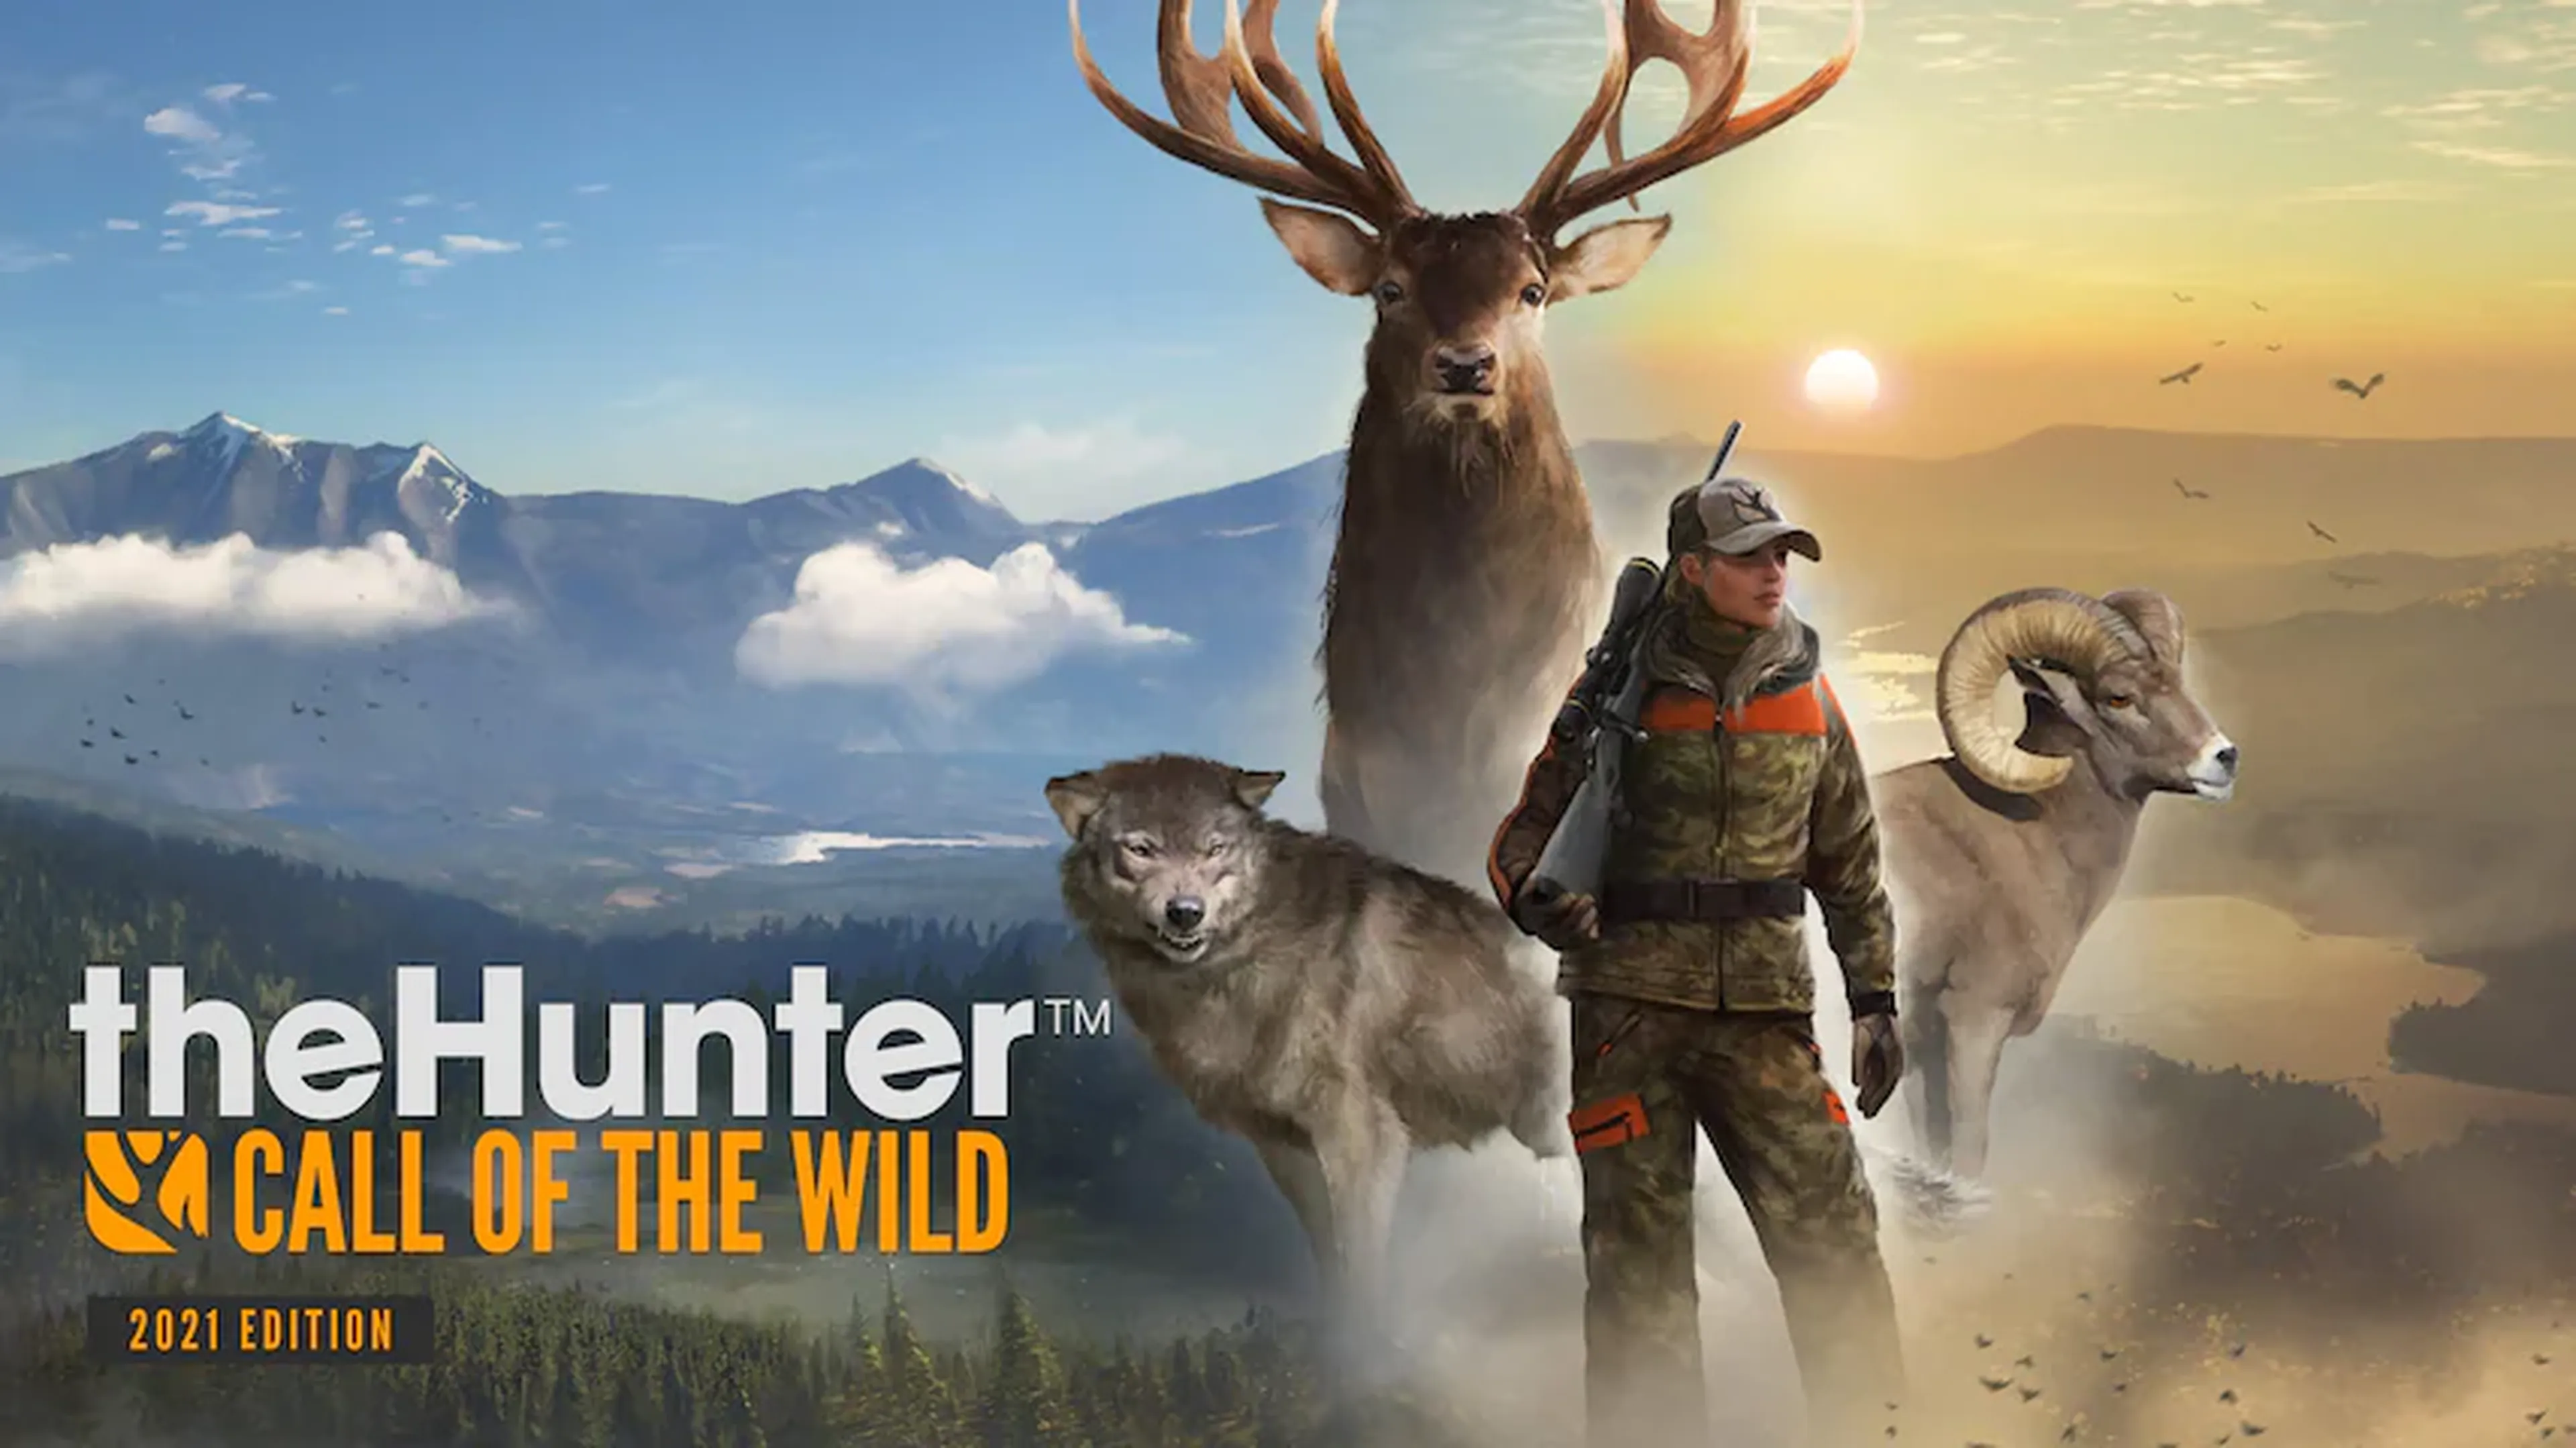 Call of the wild epic games. Игра the Hunter Call of the Wild. Игра охота the Hunter Call of the Wild. The Hunter Call of the Wild последняя версия. The Hunter Call of the Wild 2021.